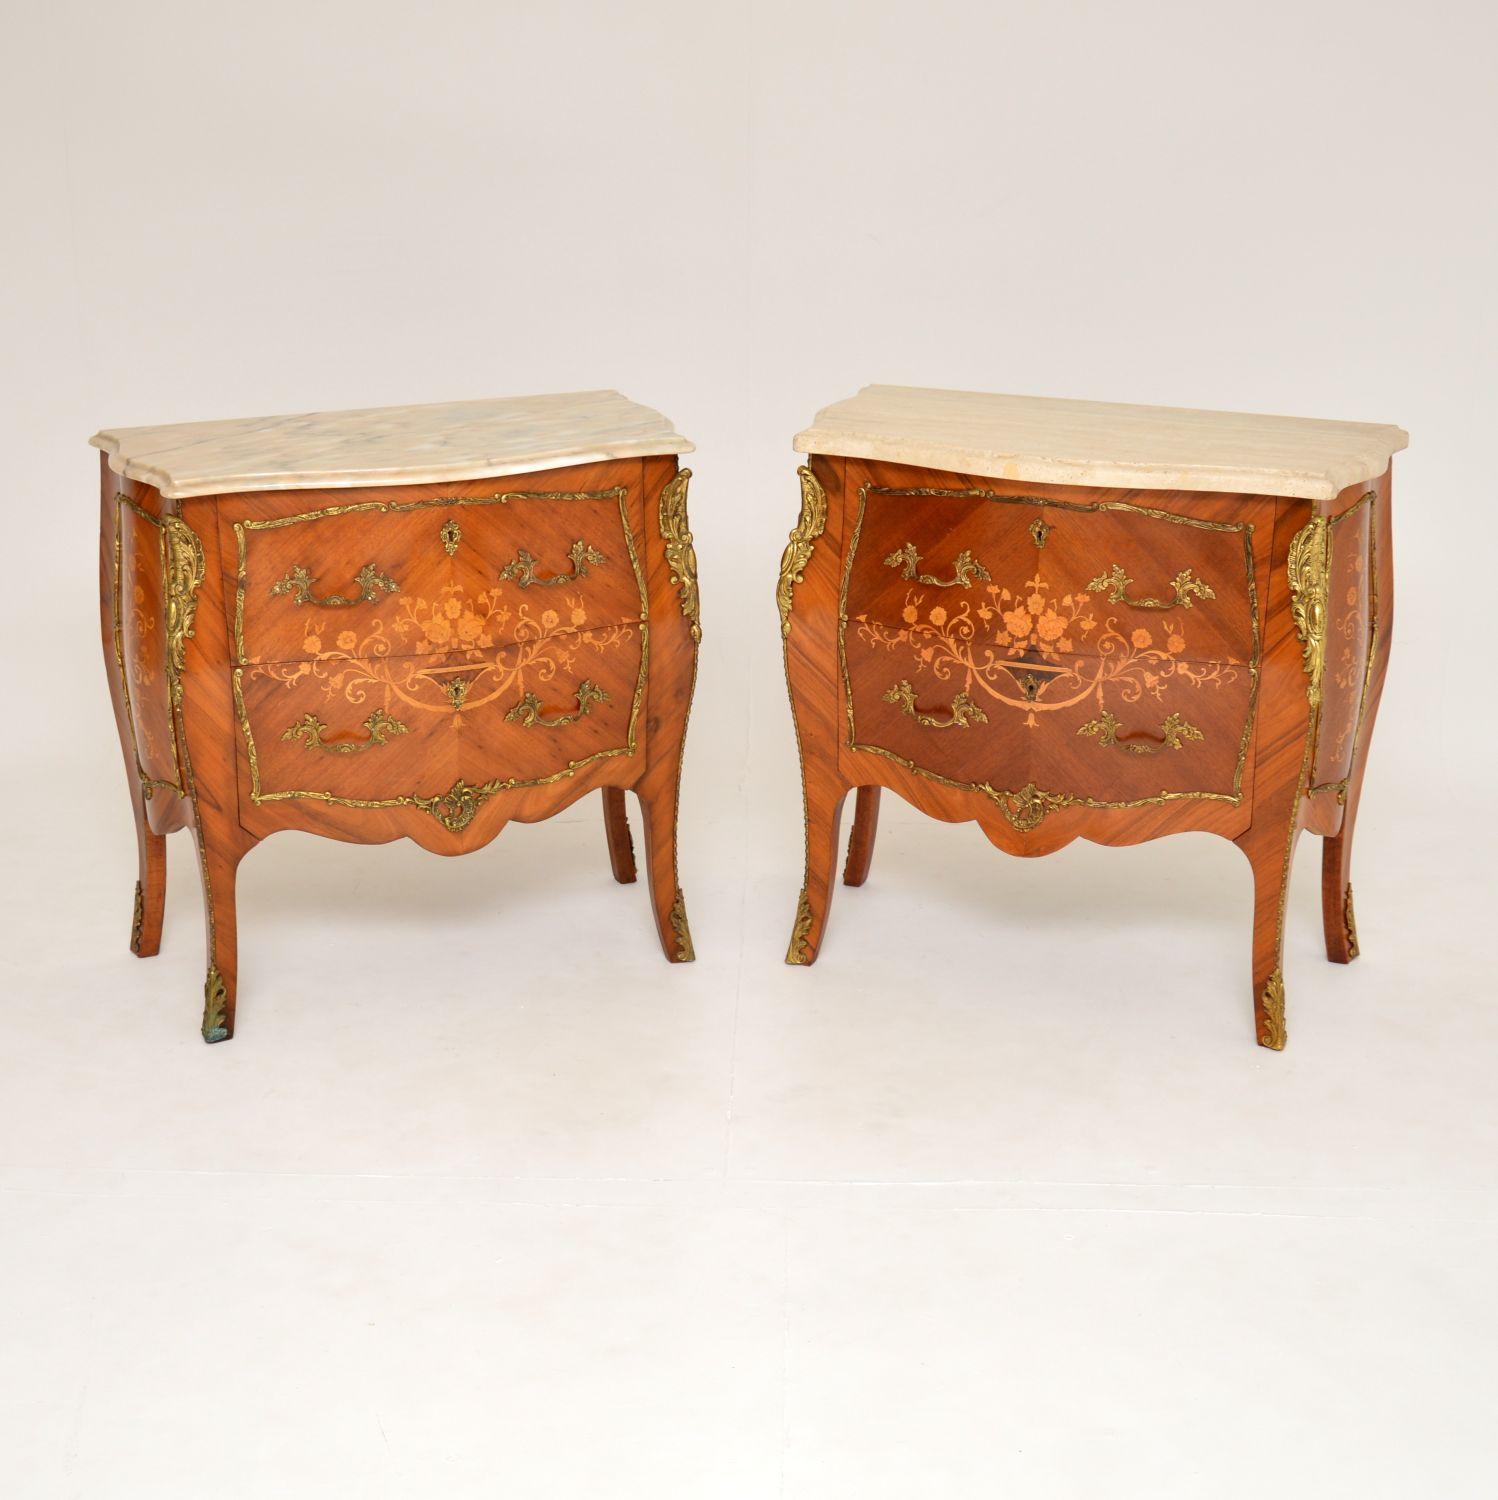 A beautiful pair of antique bombe shaped French marble top commodes, dating from around the 1930’s period.

They are of lovely quality and have stunning inlaid marquetry of various woods. There are superb decorative ormolu mounts throughout, and